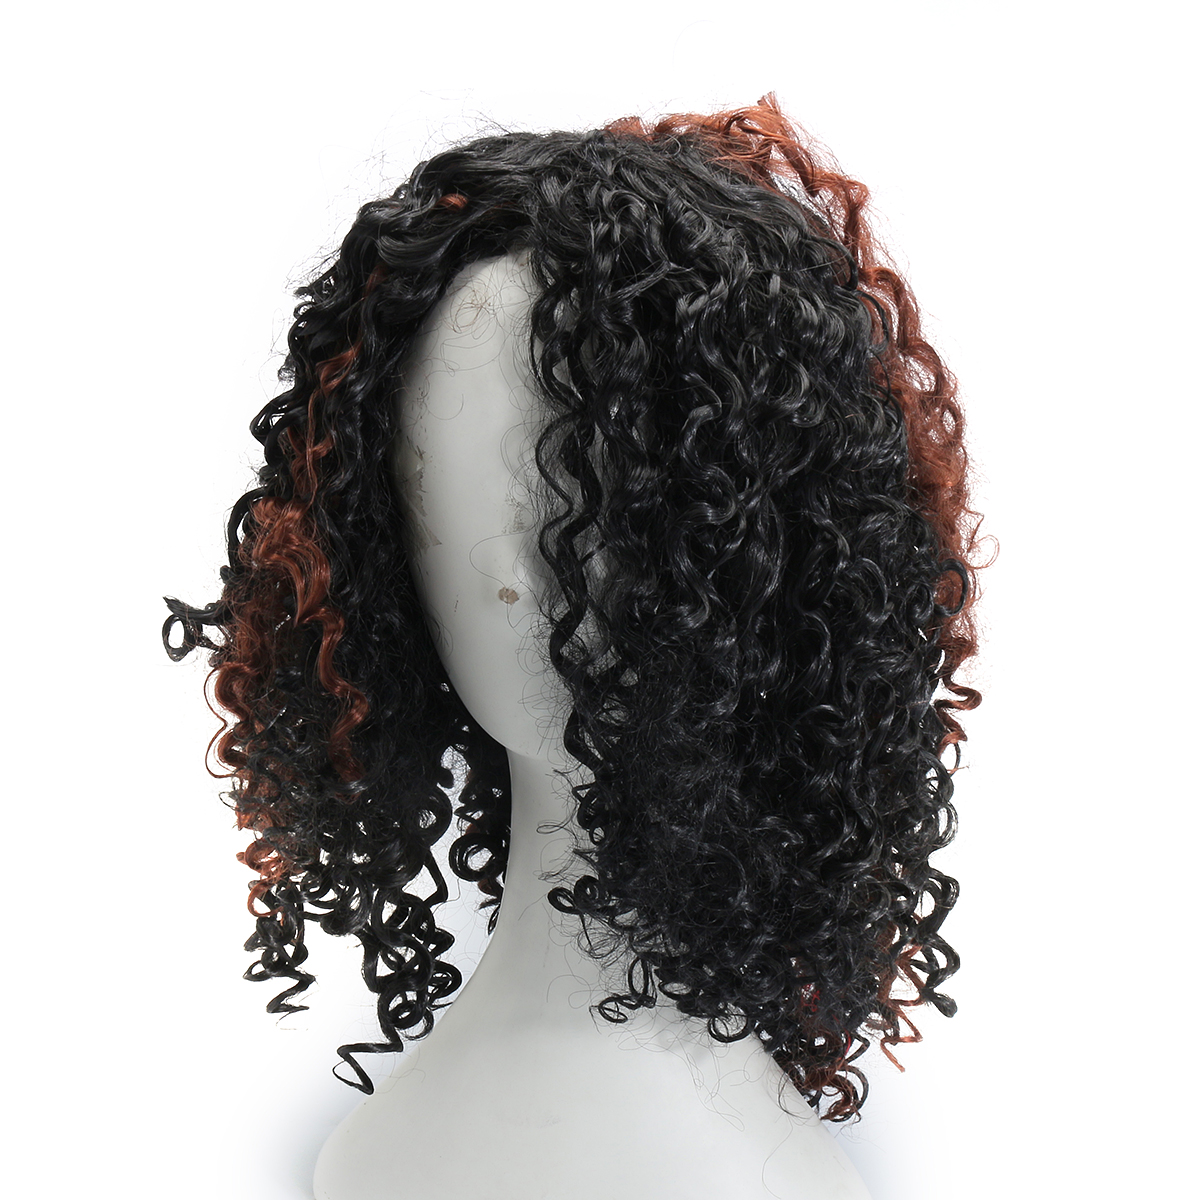 Brazilian-Black-Brown-Hair-Deep-Wavy-Curly-Lace-Front-Full-Wig-1230999-2